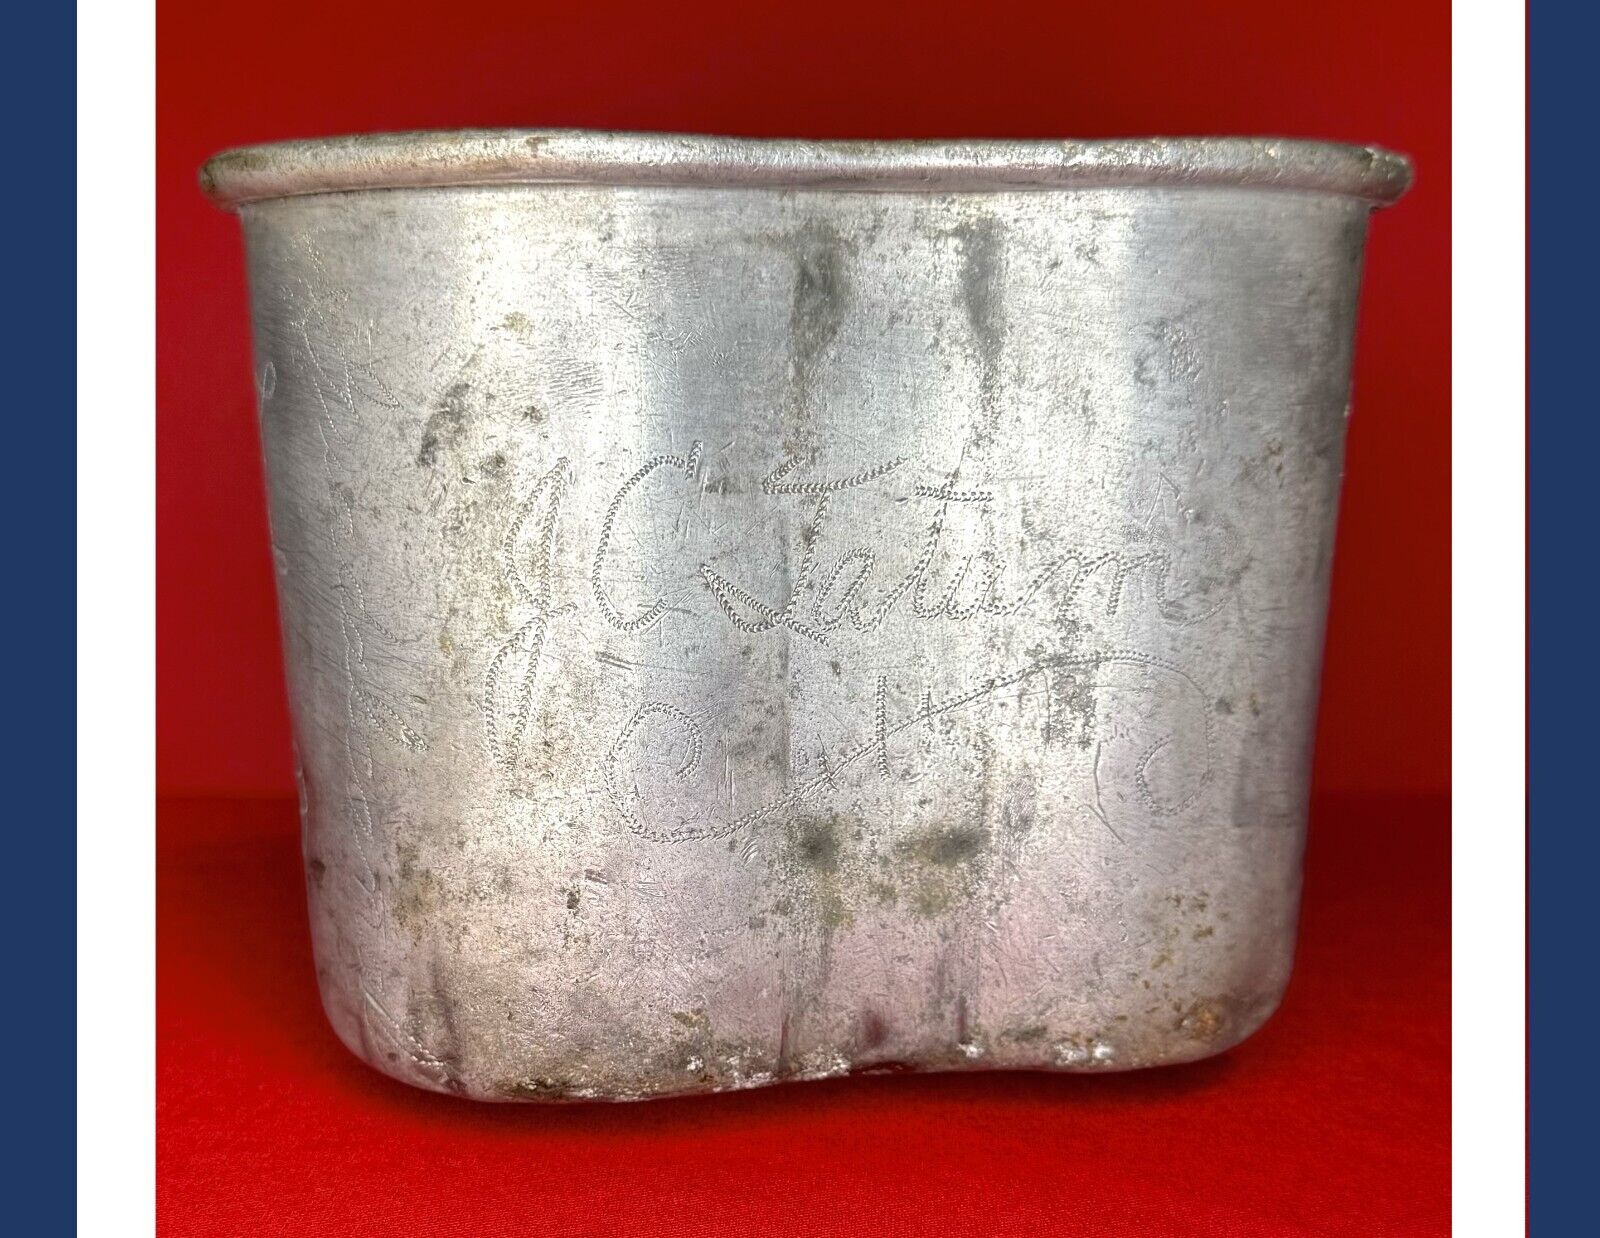 GUADALCANAL.SCOUT SNIPER.8th Marines,2nd Mar Div.WW2 USMC Trench Art Canteen Cup